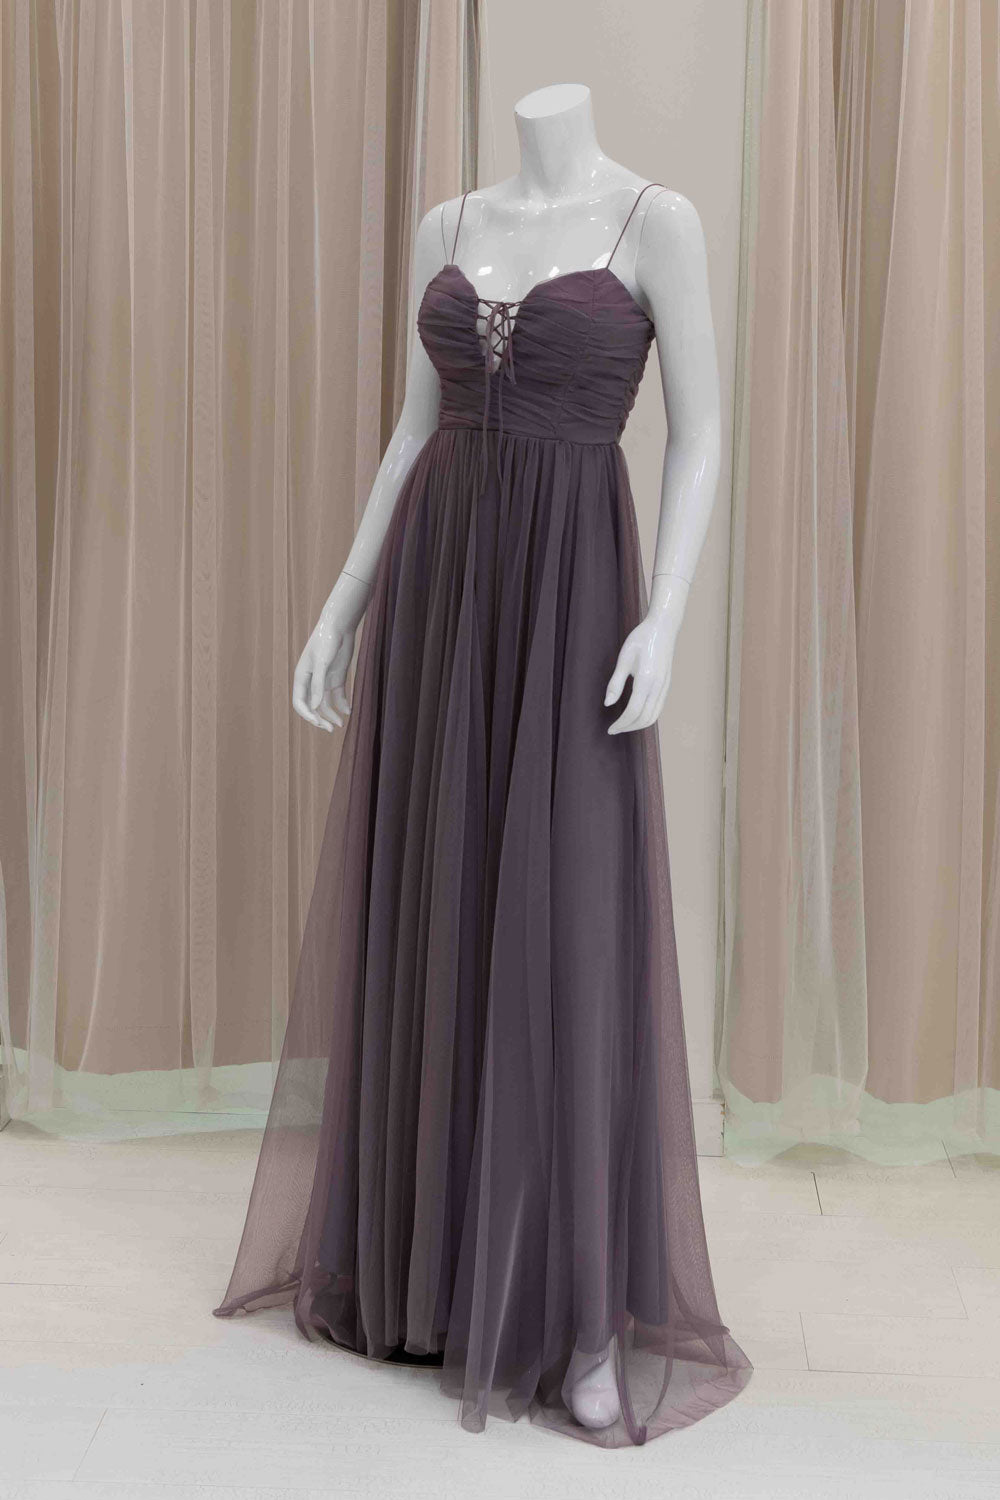 Simple Tulle Evening Gown in Dusty Lavender